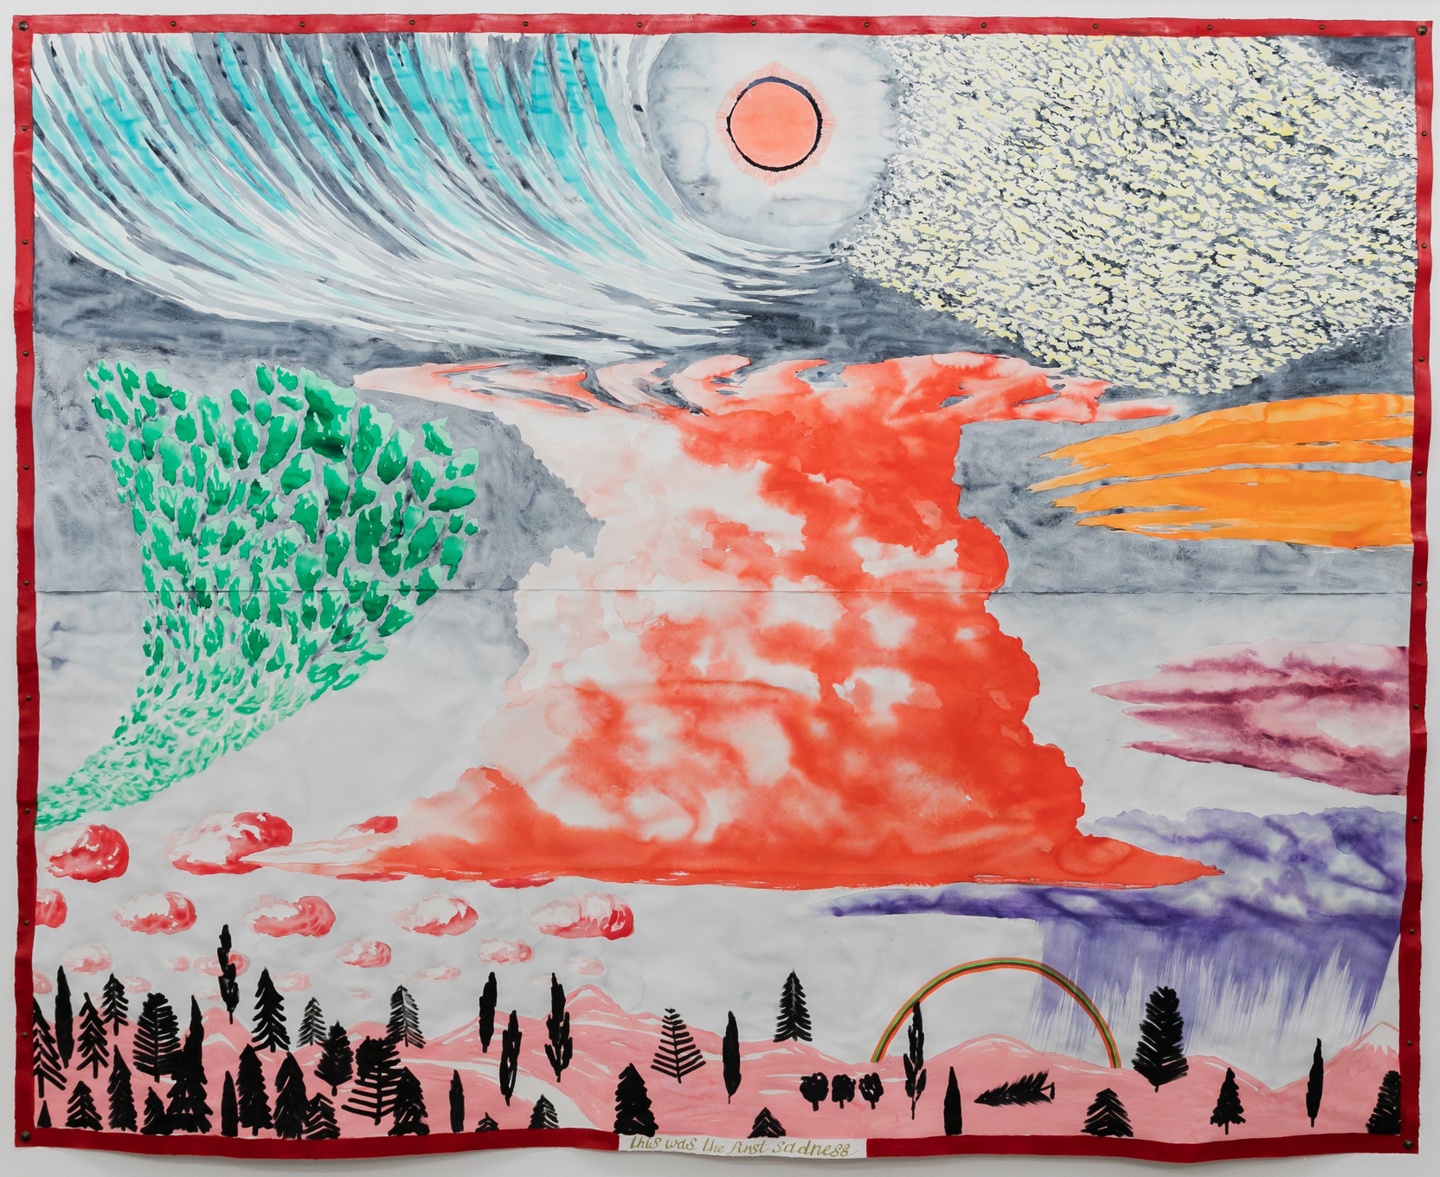 A multicolored landscape painting with bright orange, purple and maroon clouds, pink landscapes and black trees